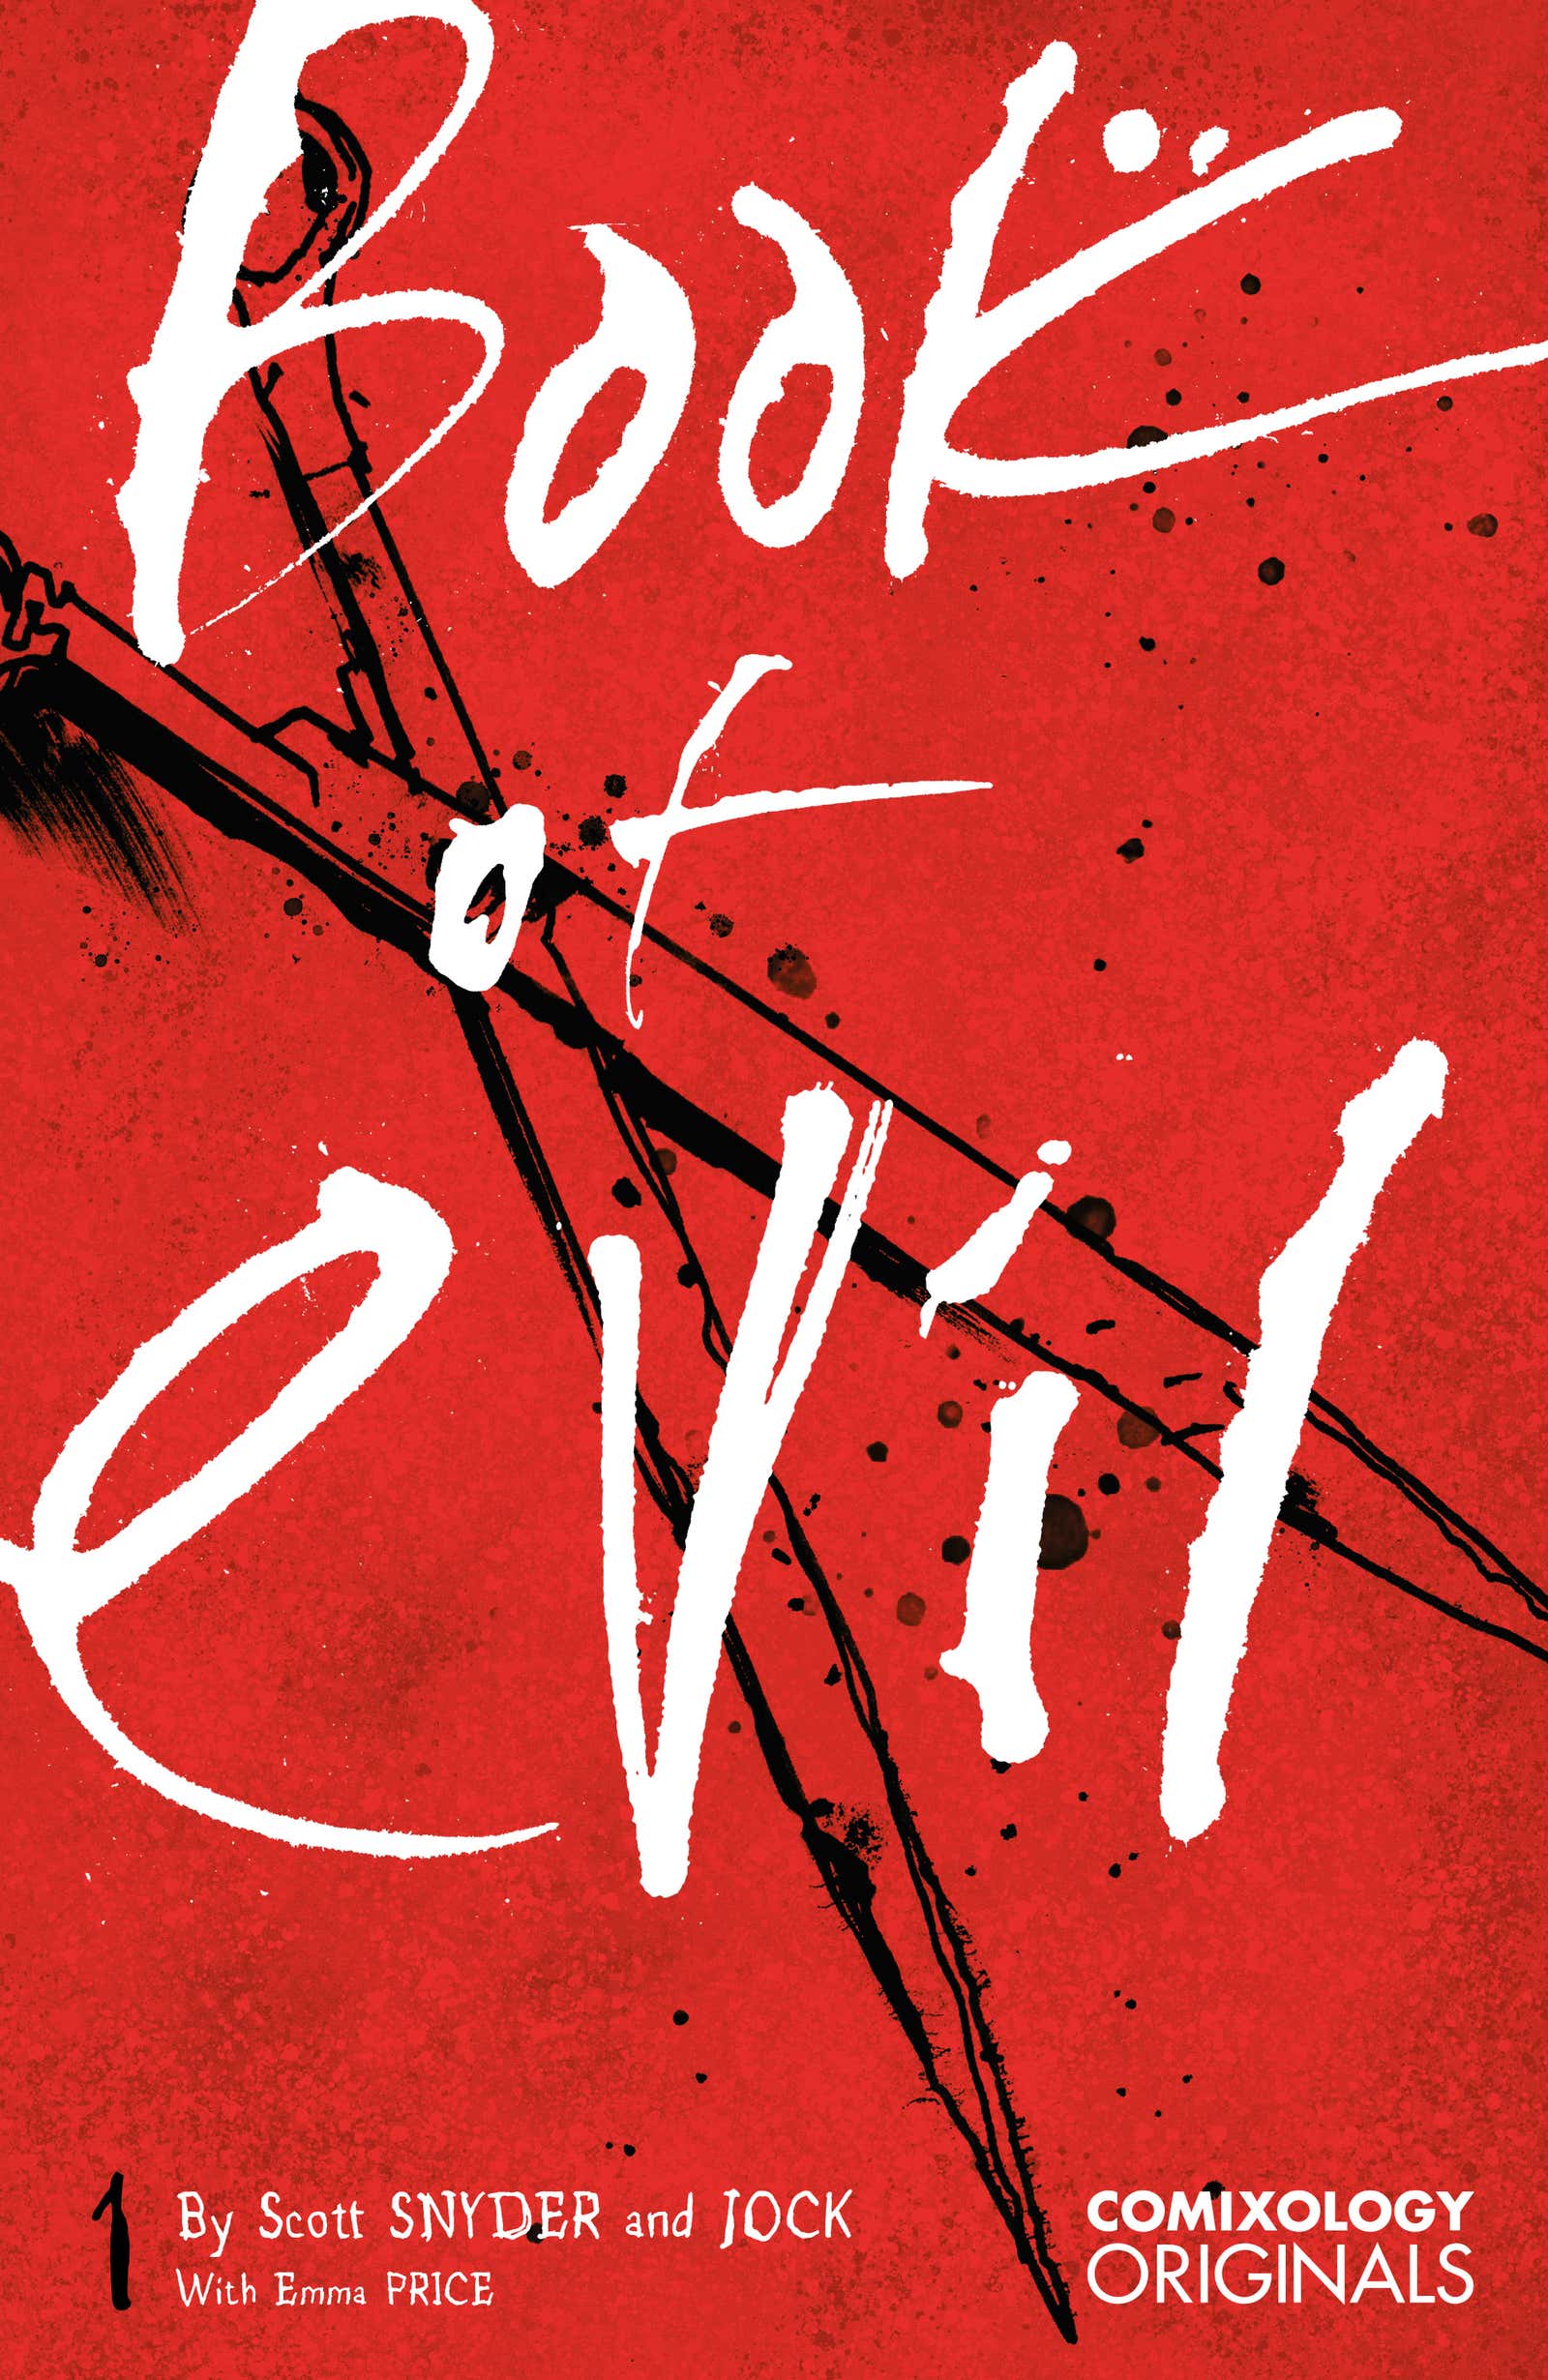 Comixology First Look: Book of Evil #1